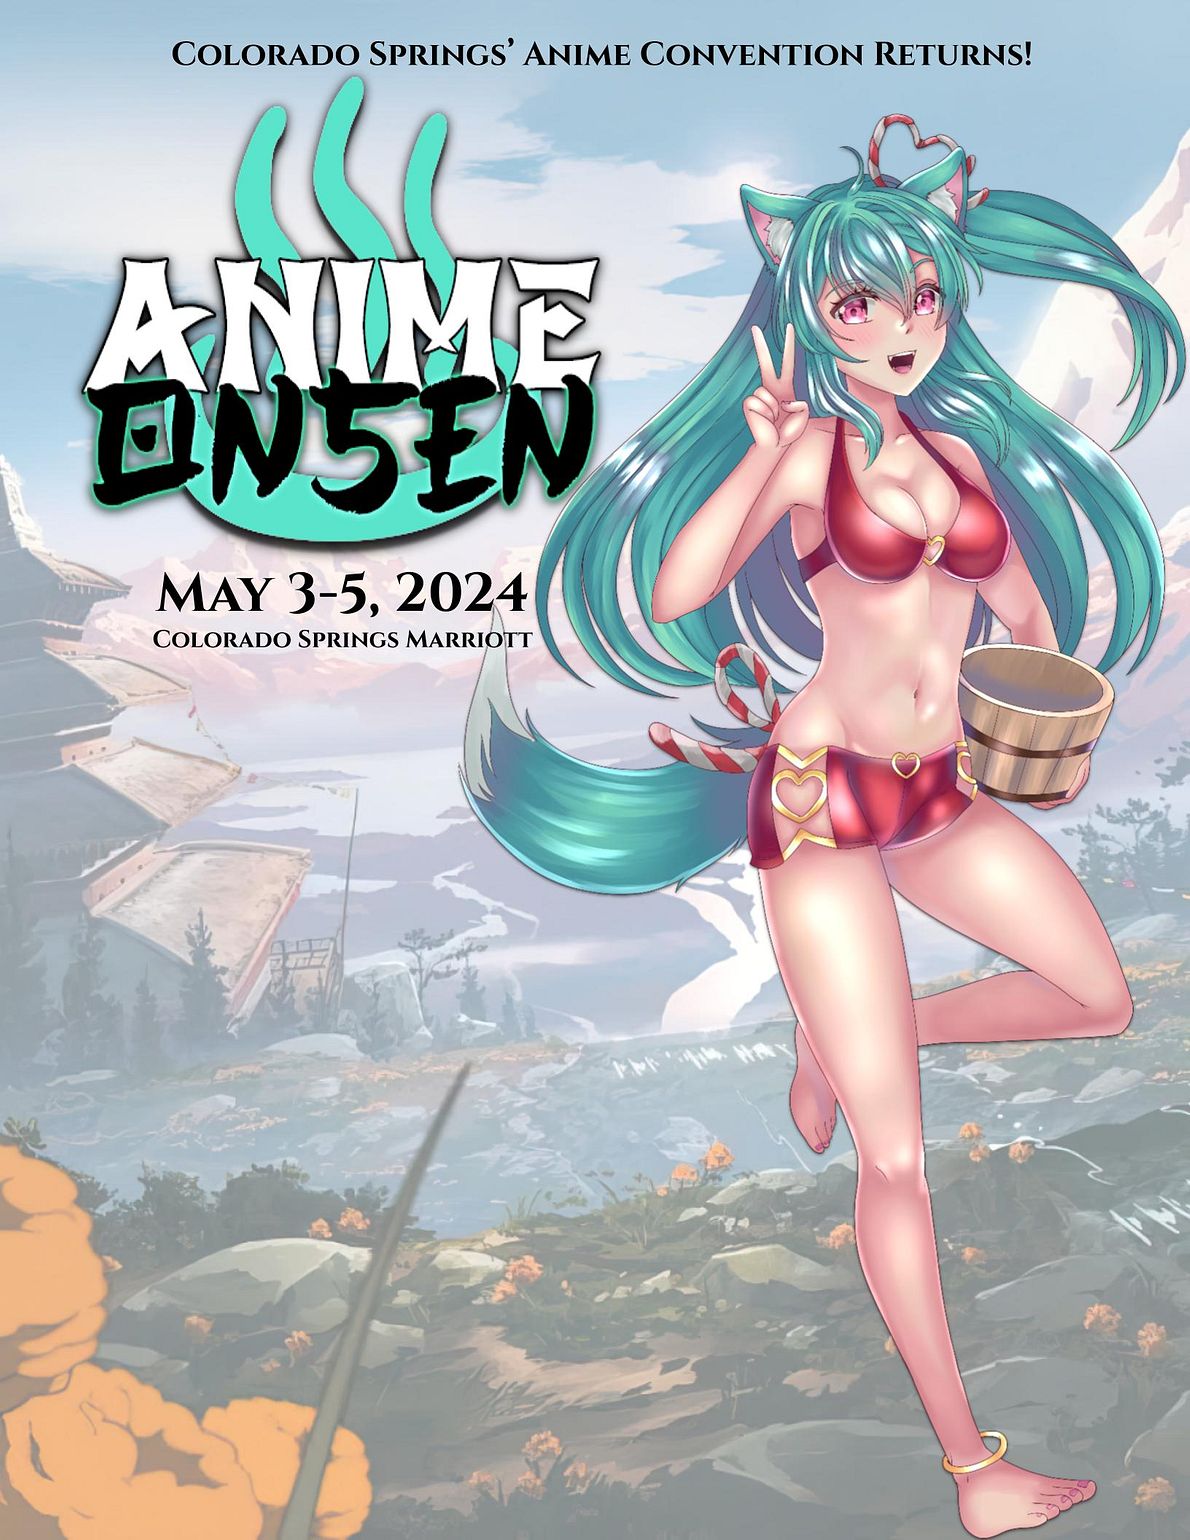 CDC zeroes in on anime convention to understand omicron variant